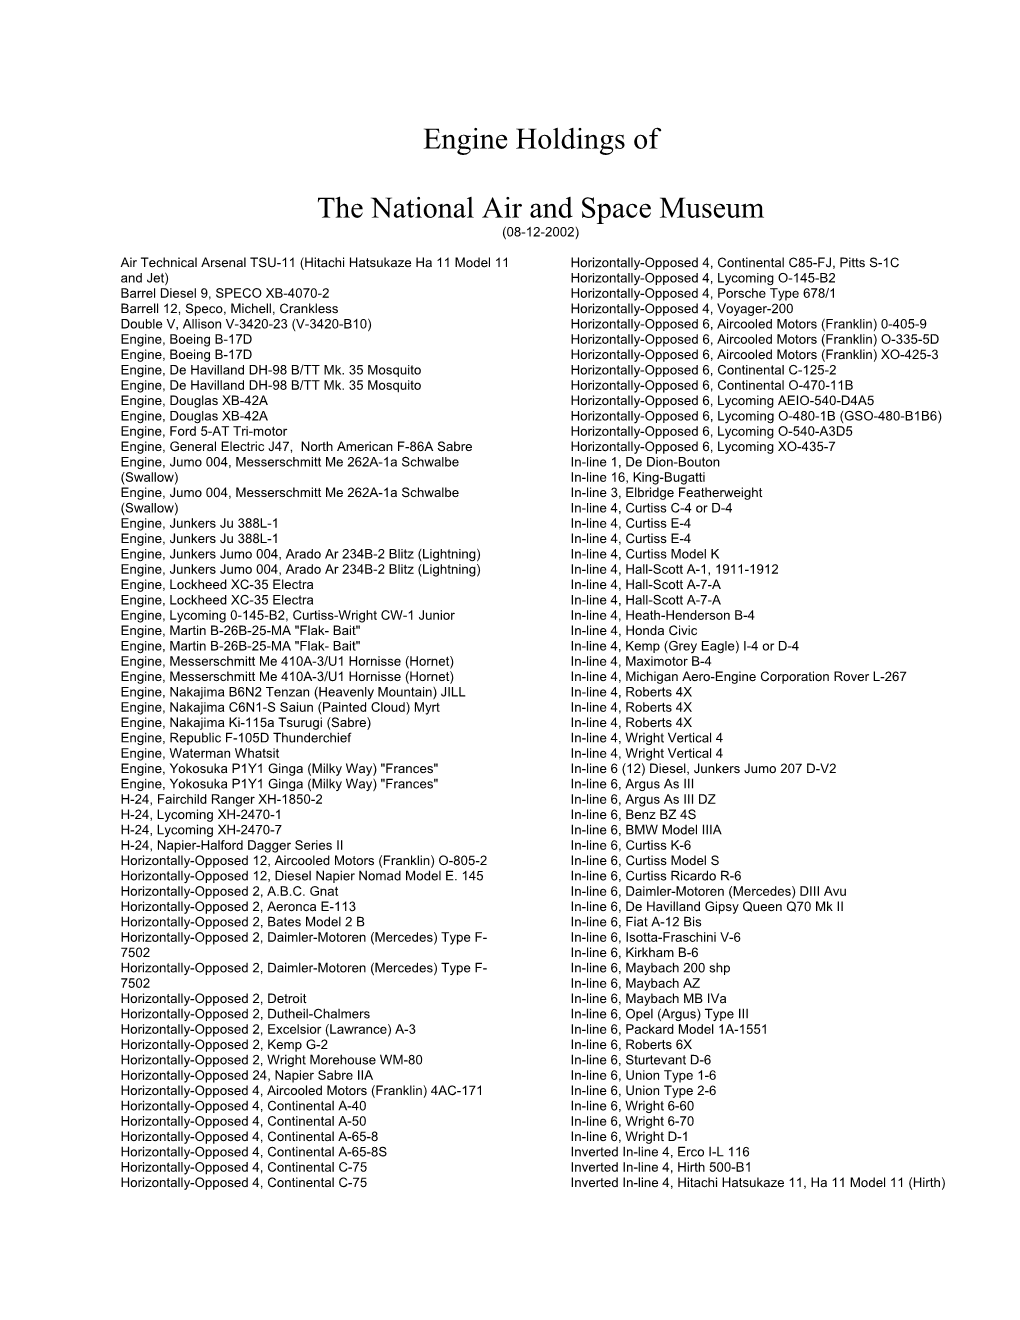 Engine Holdings of the National Air and Space Museum